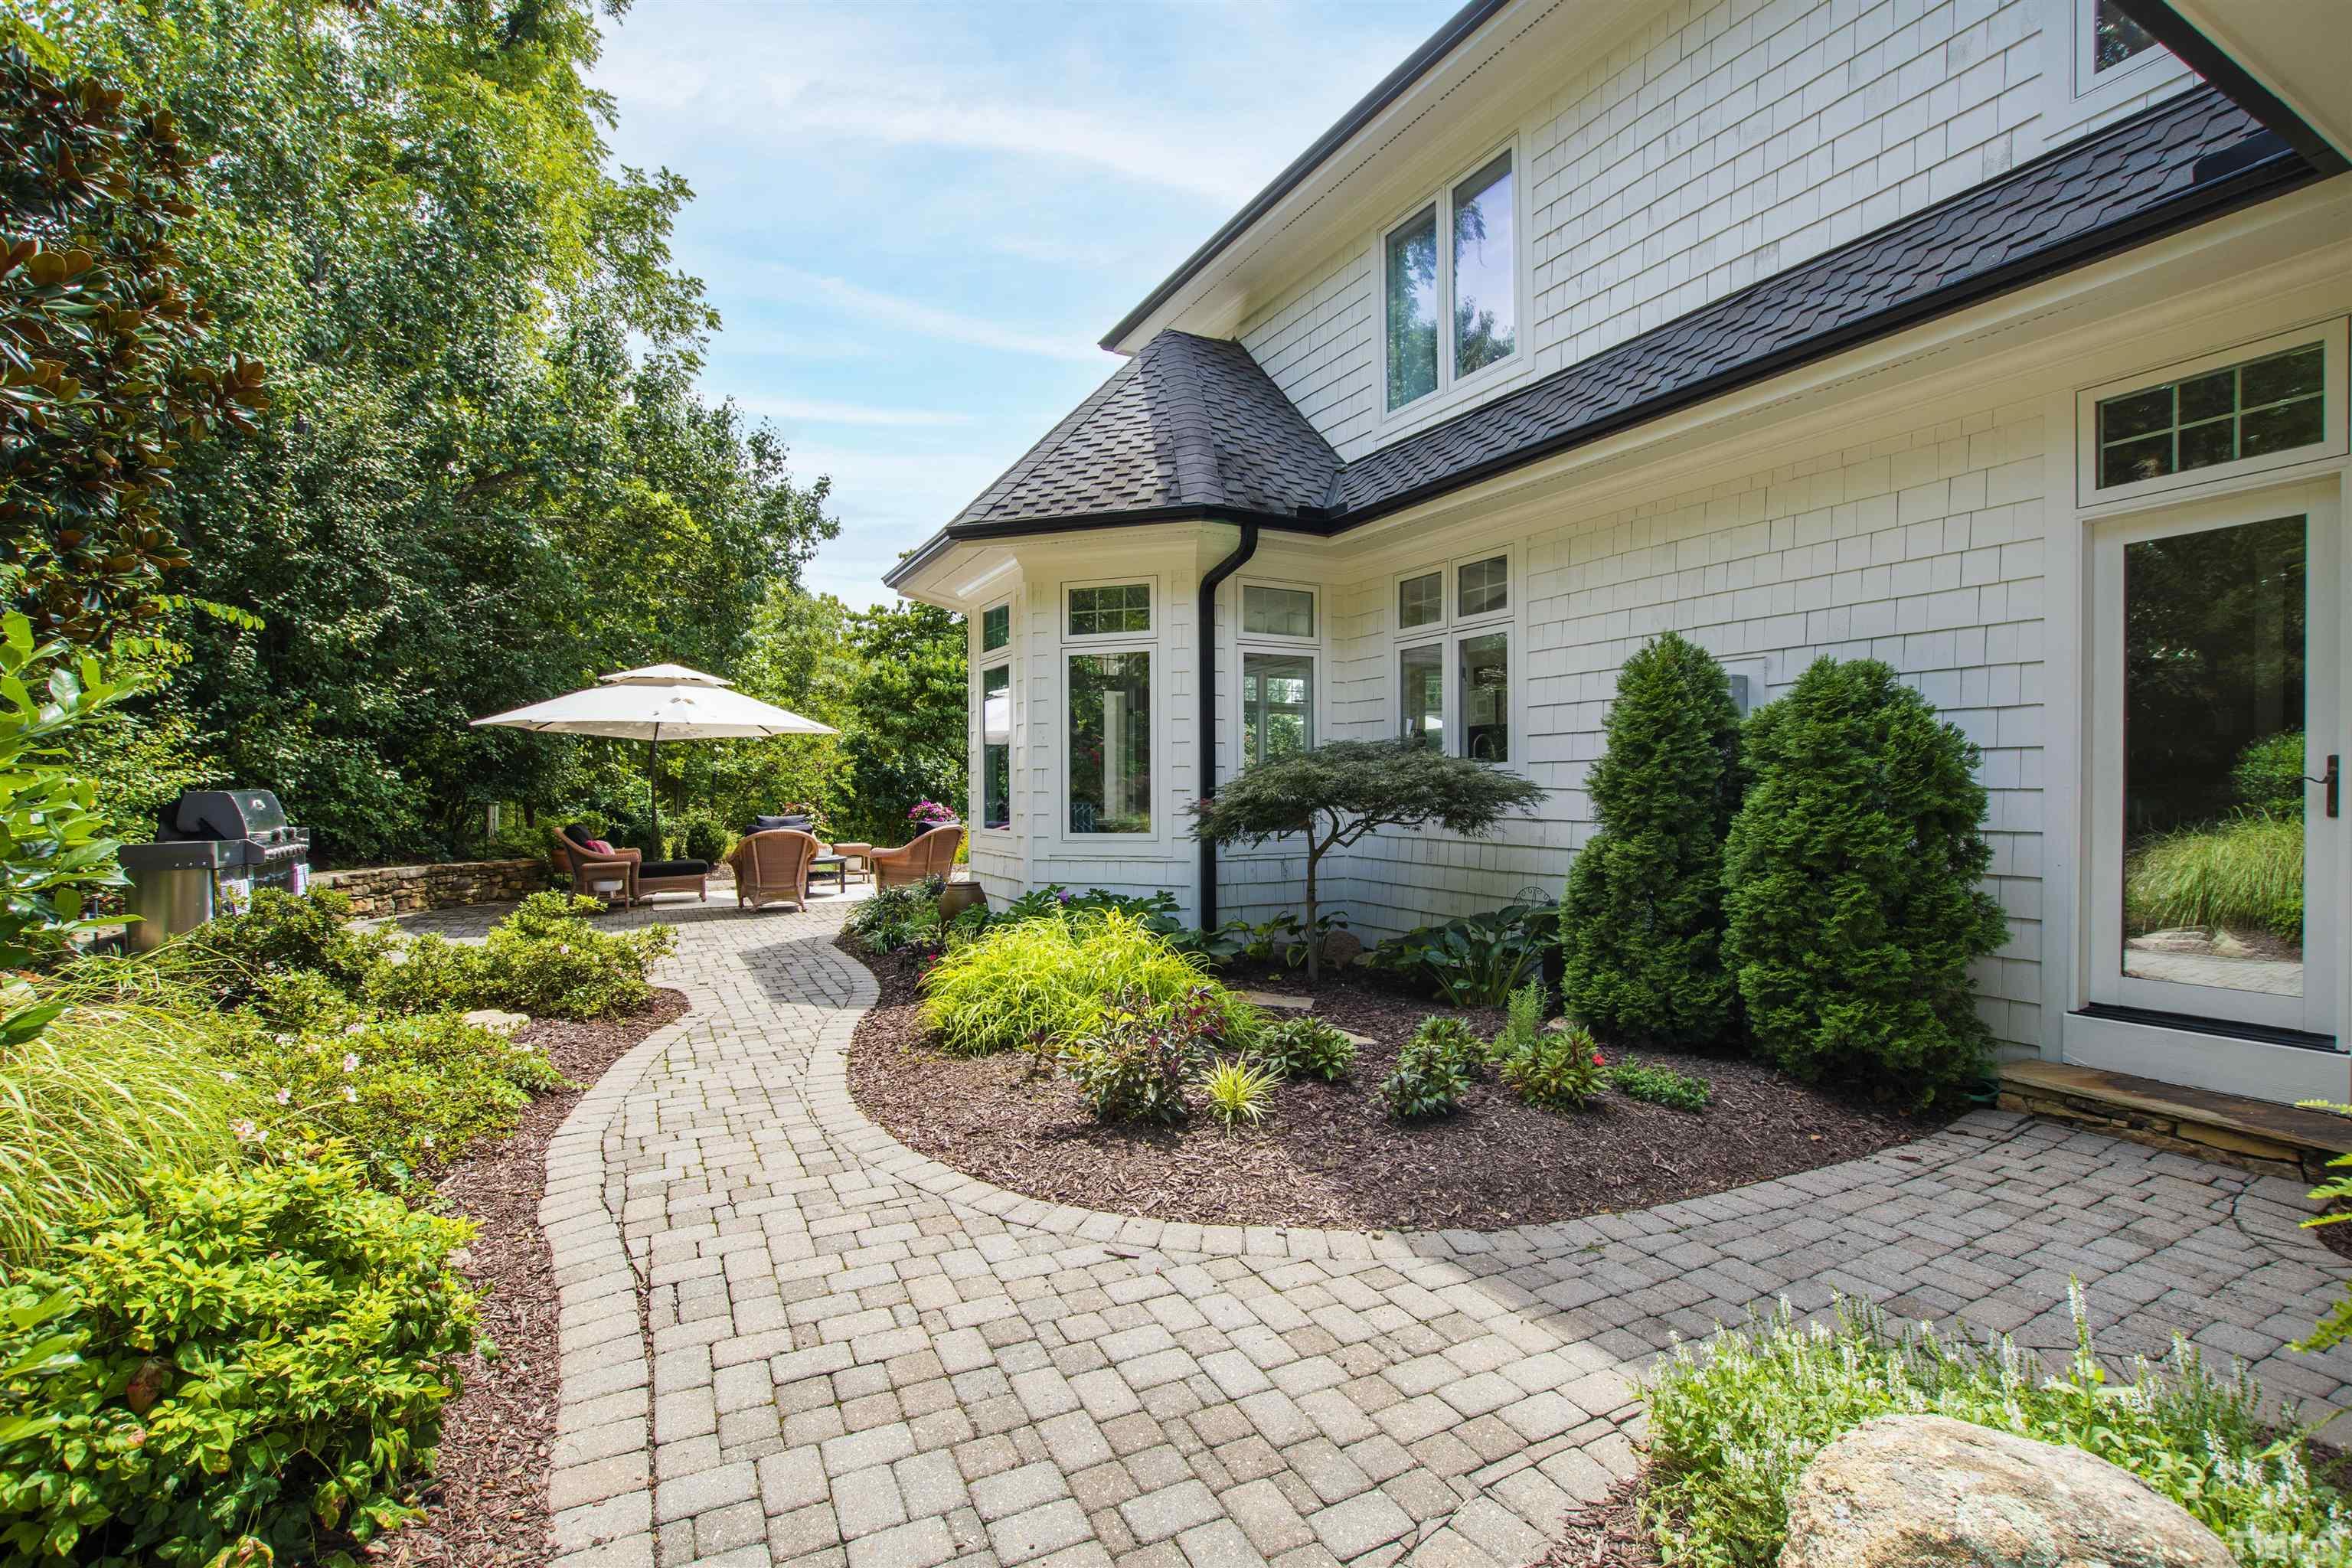 Paved stone access to rear patio.